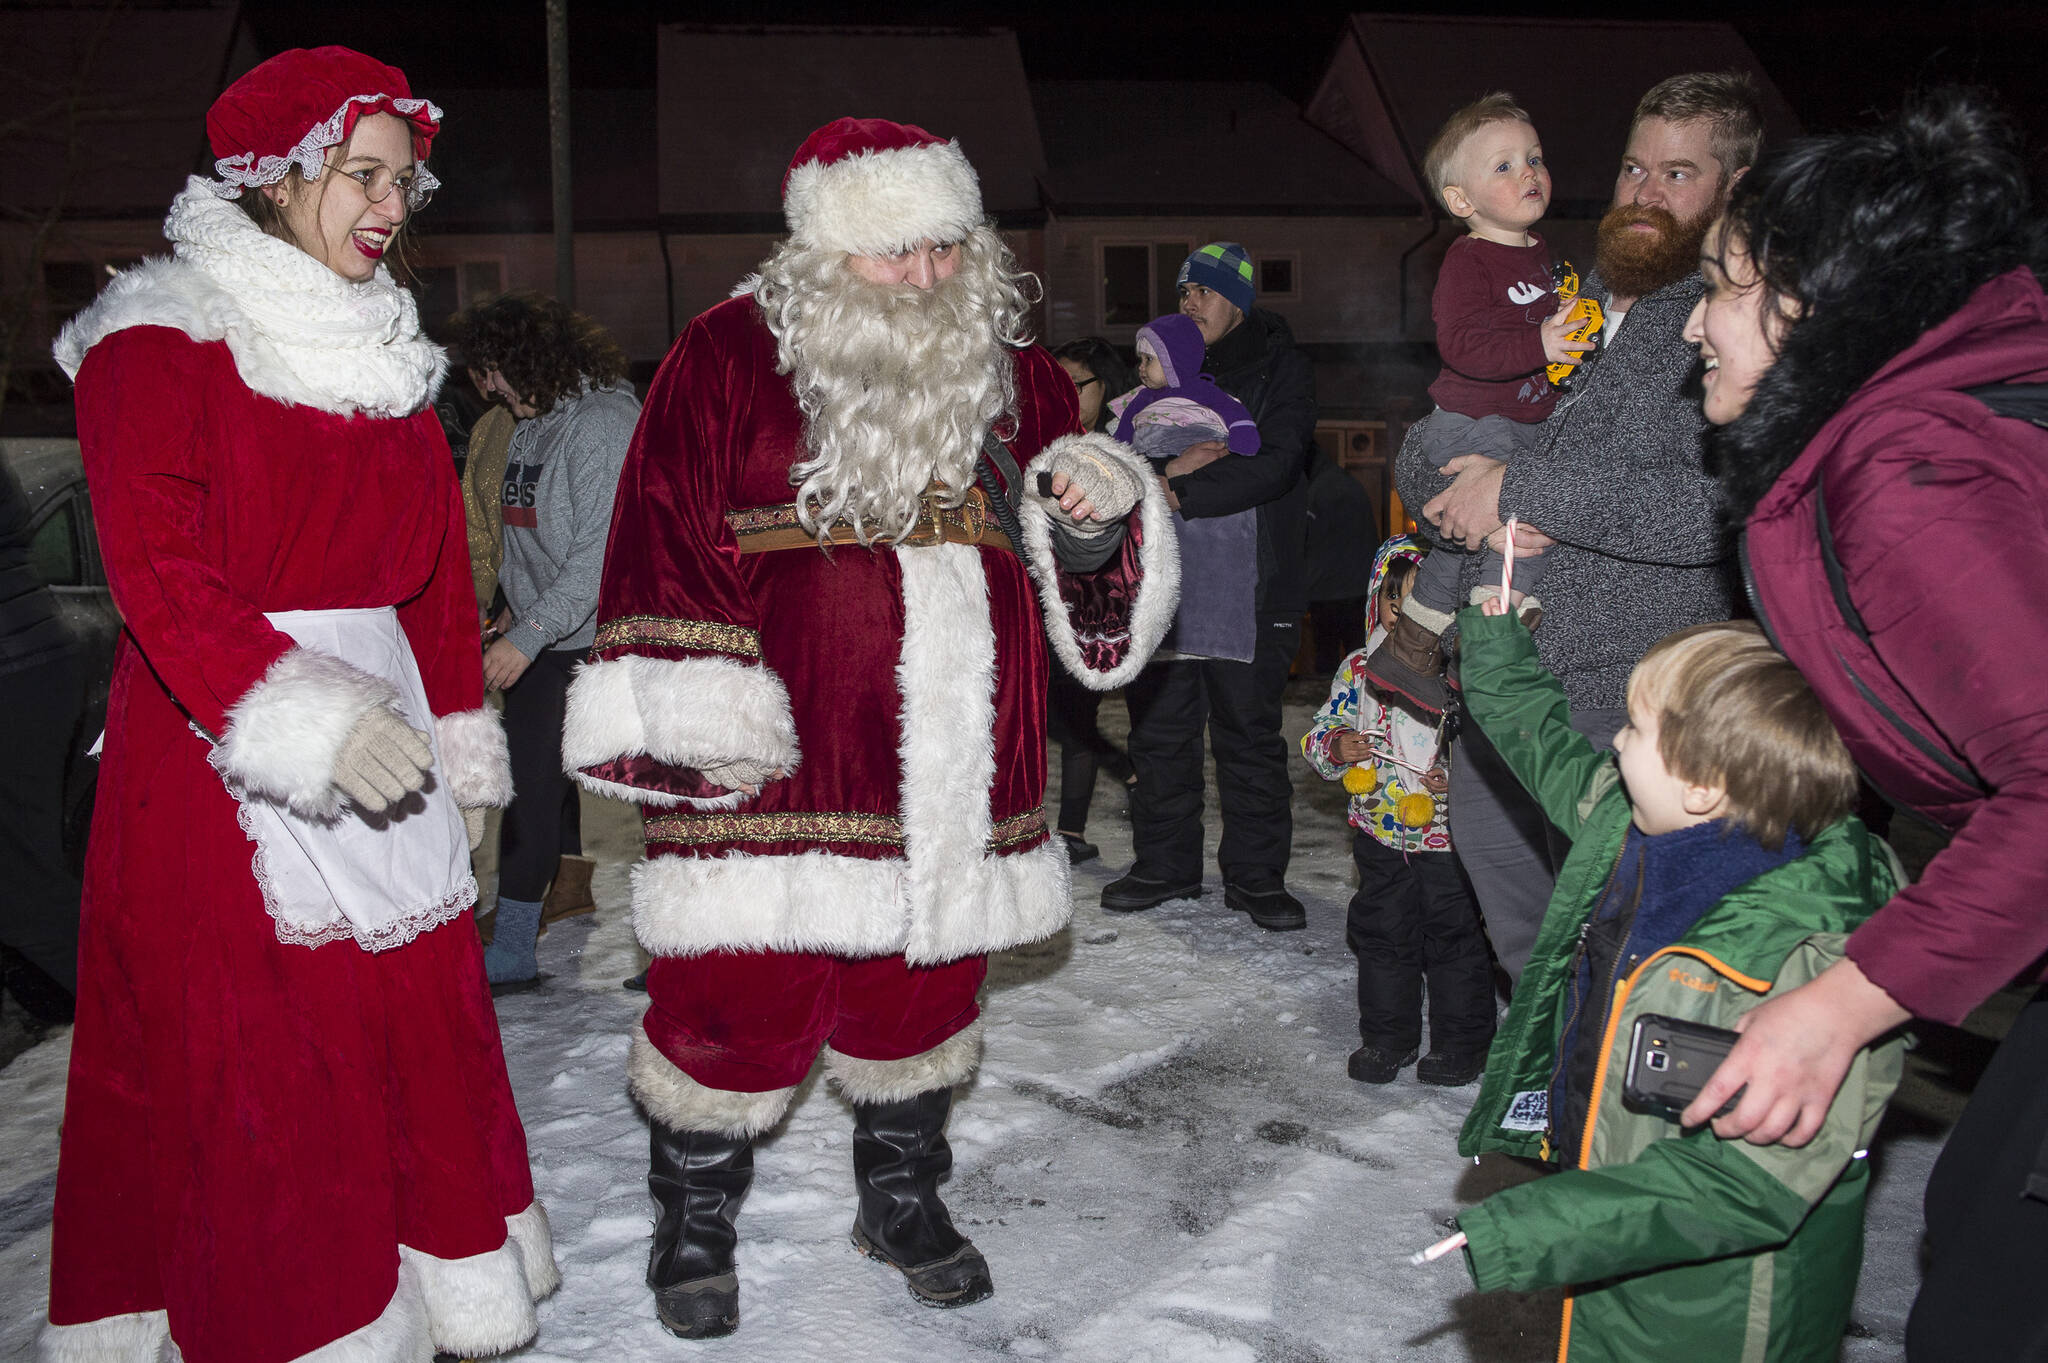 Mr. and Mrs. Claus stop to visit families at Cedar Park during the annual Capital City Fire/Rescue Santa Parade in December 2018. (Michael Penn / Juneau Empire File)